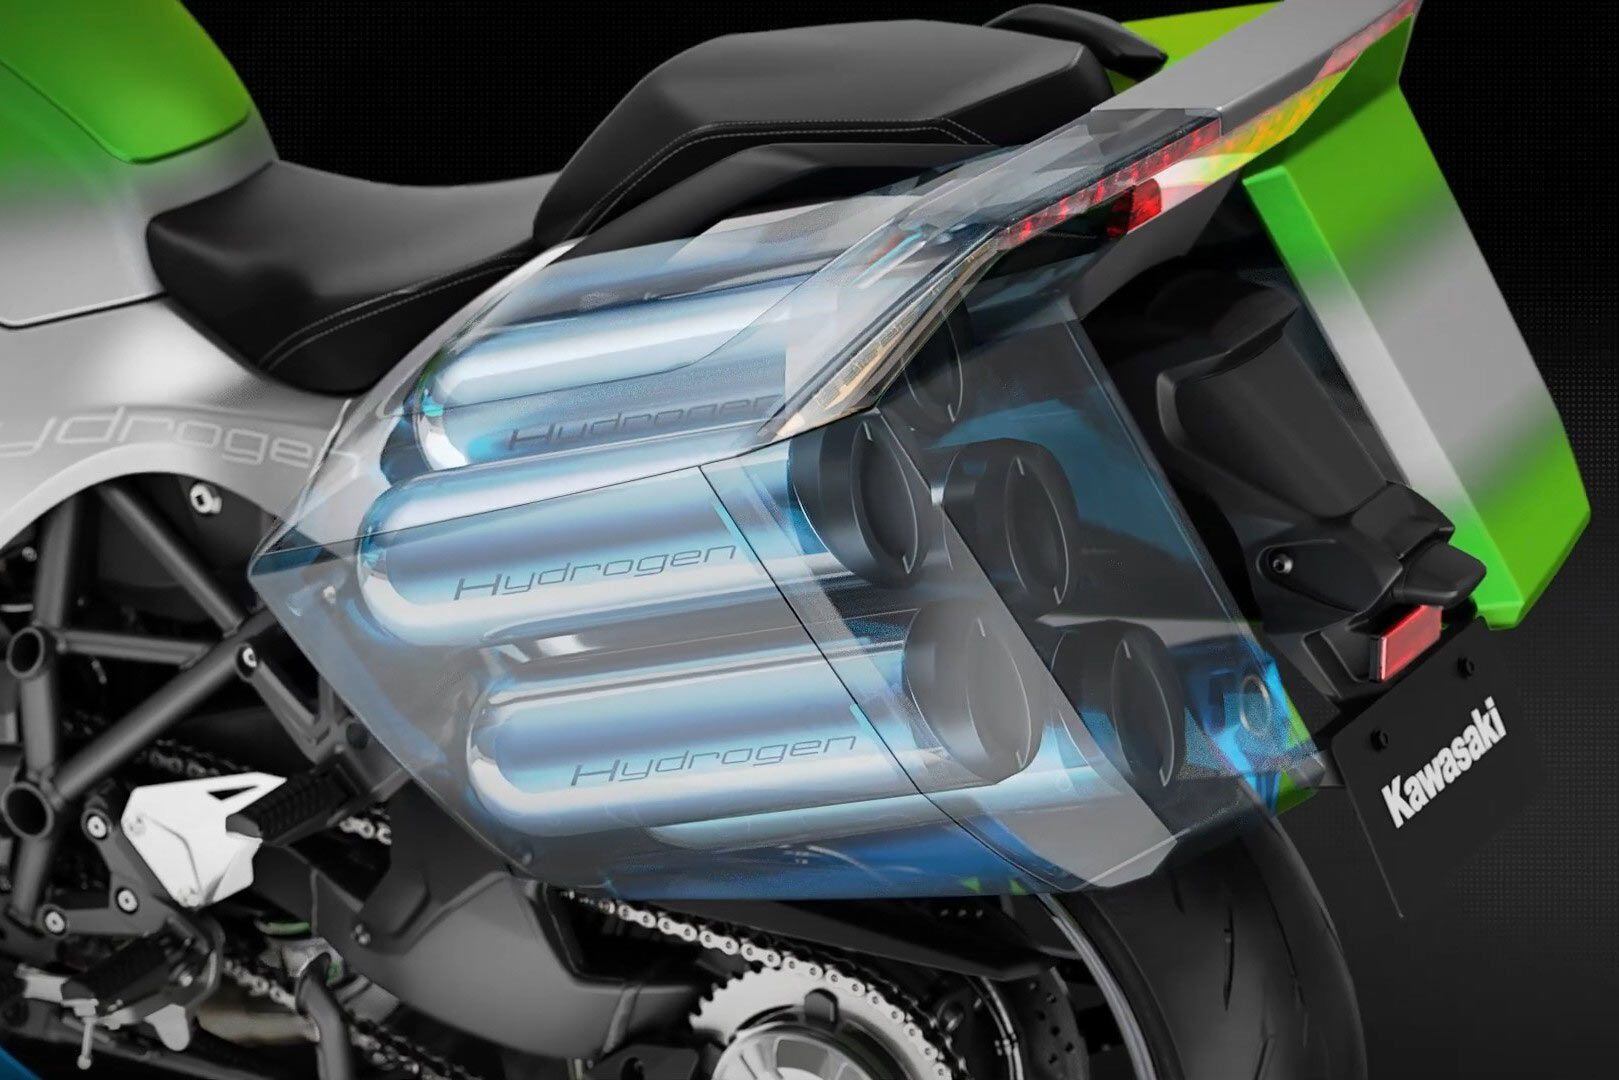 Kawasaki is currently working with Yamaha and Toyota to create a swapable hydrogen canister standard, allowing riders to switch out the canisters at vending stations.